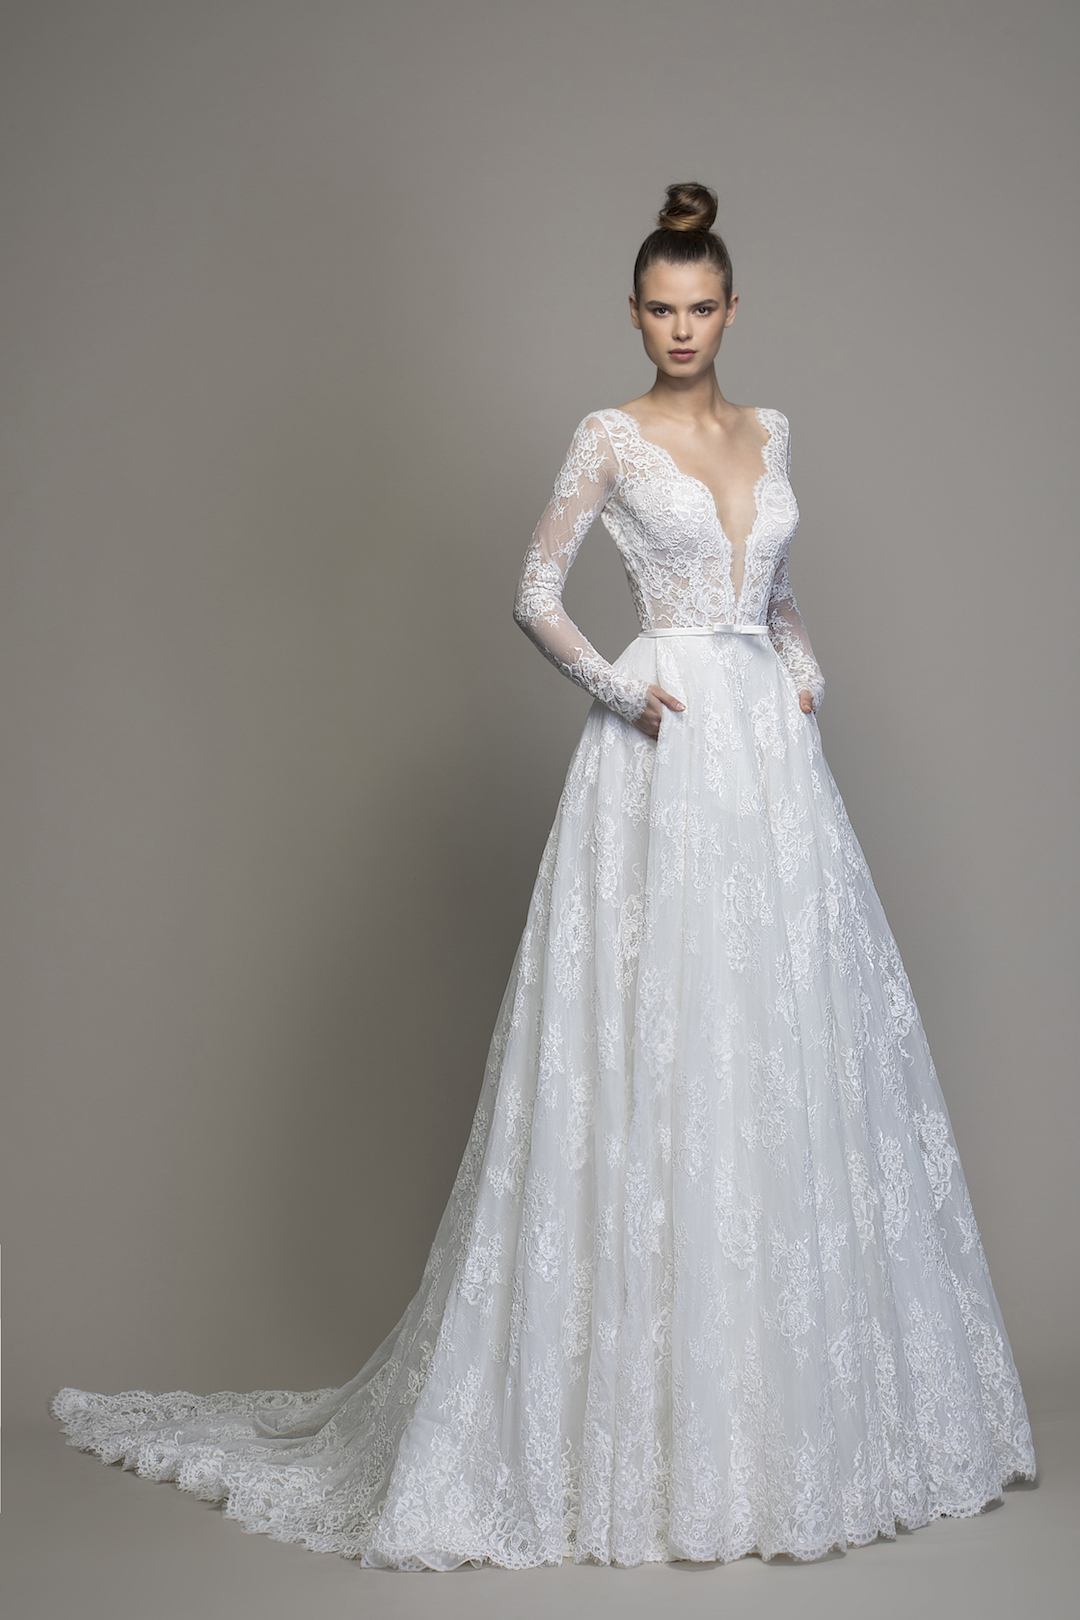 lace a line wedding dress with long sleeves